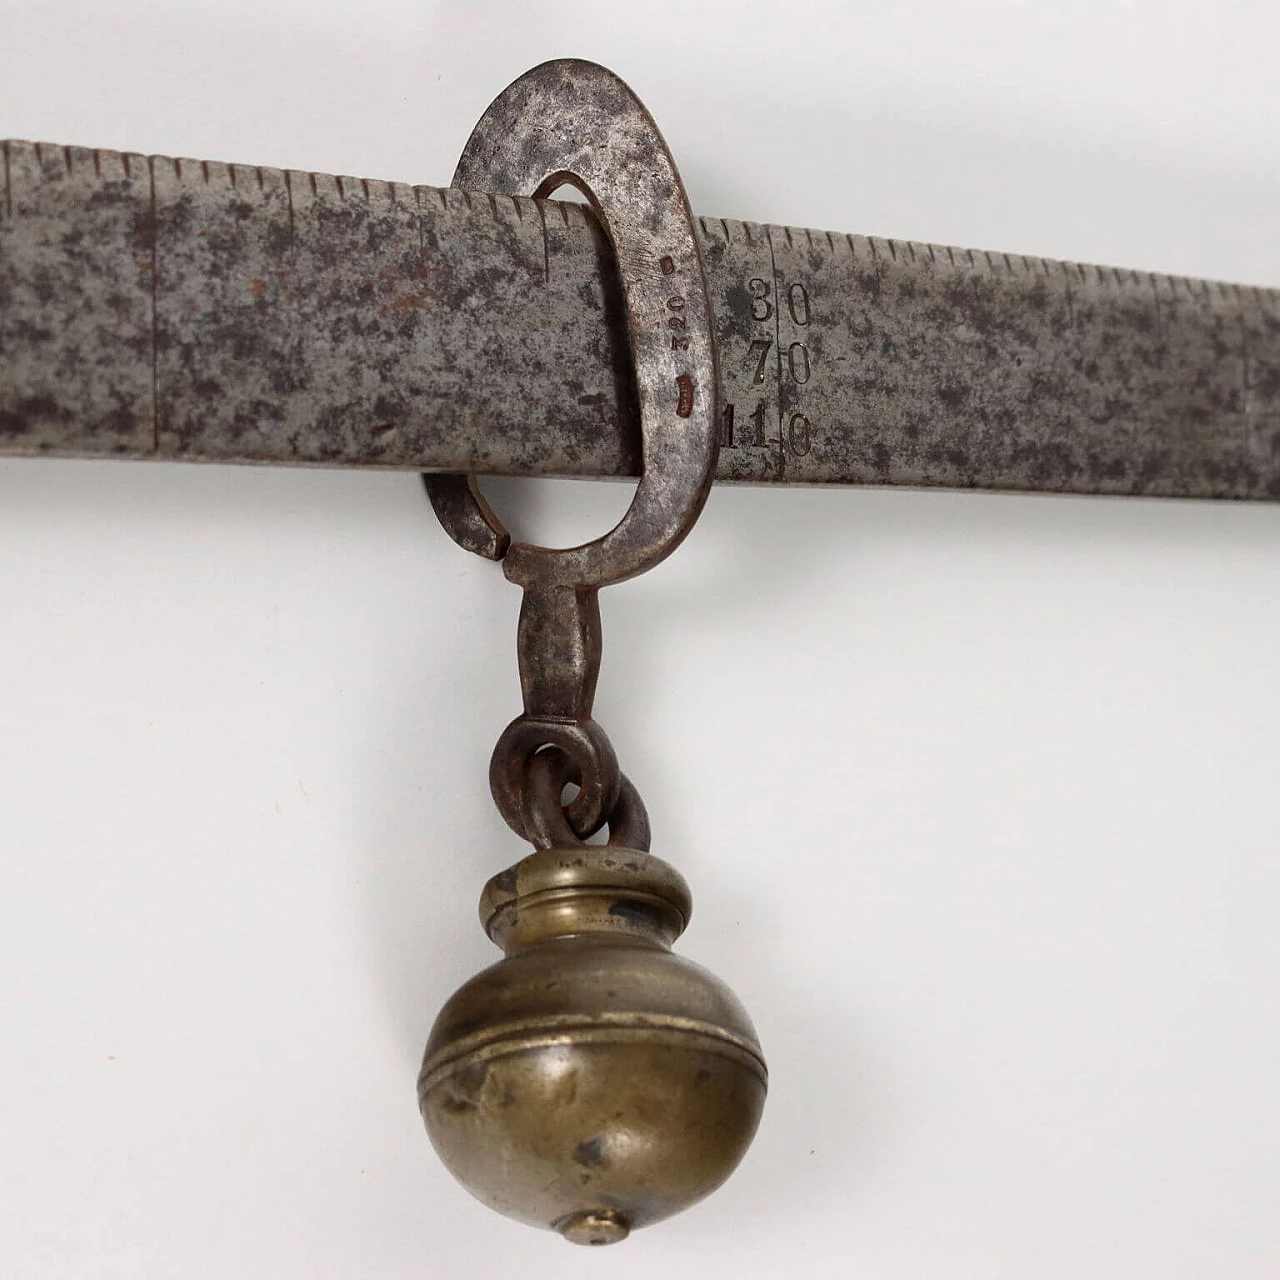 Iron and bronze stadera scale, late 19th century 7